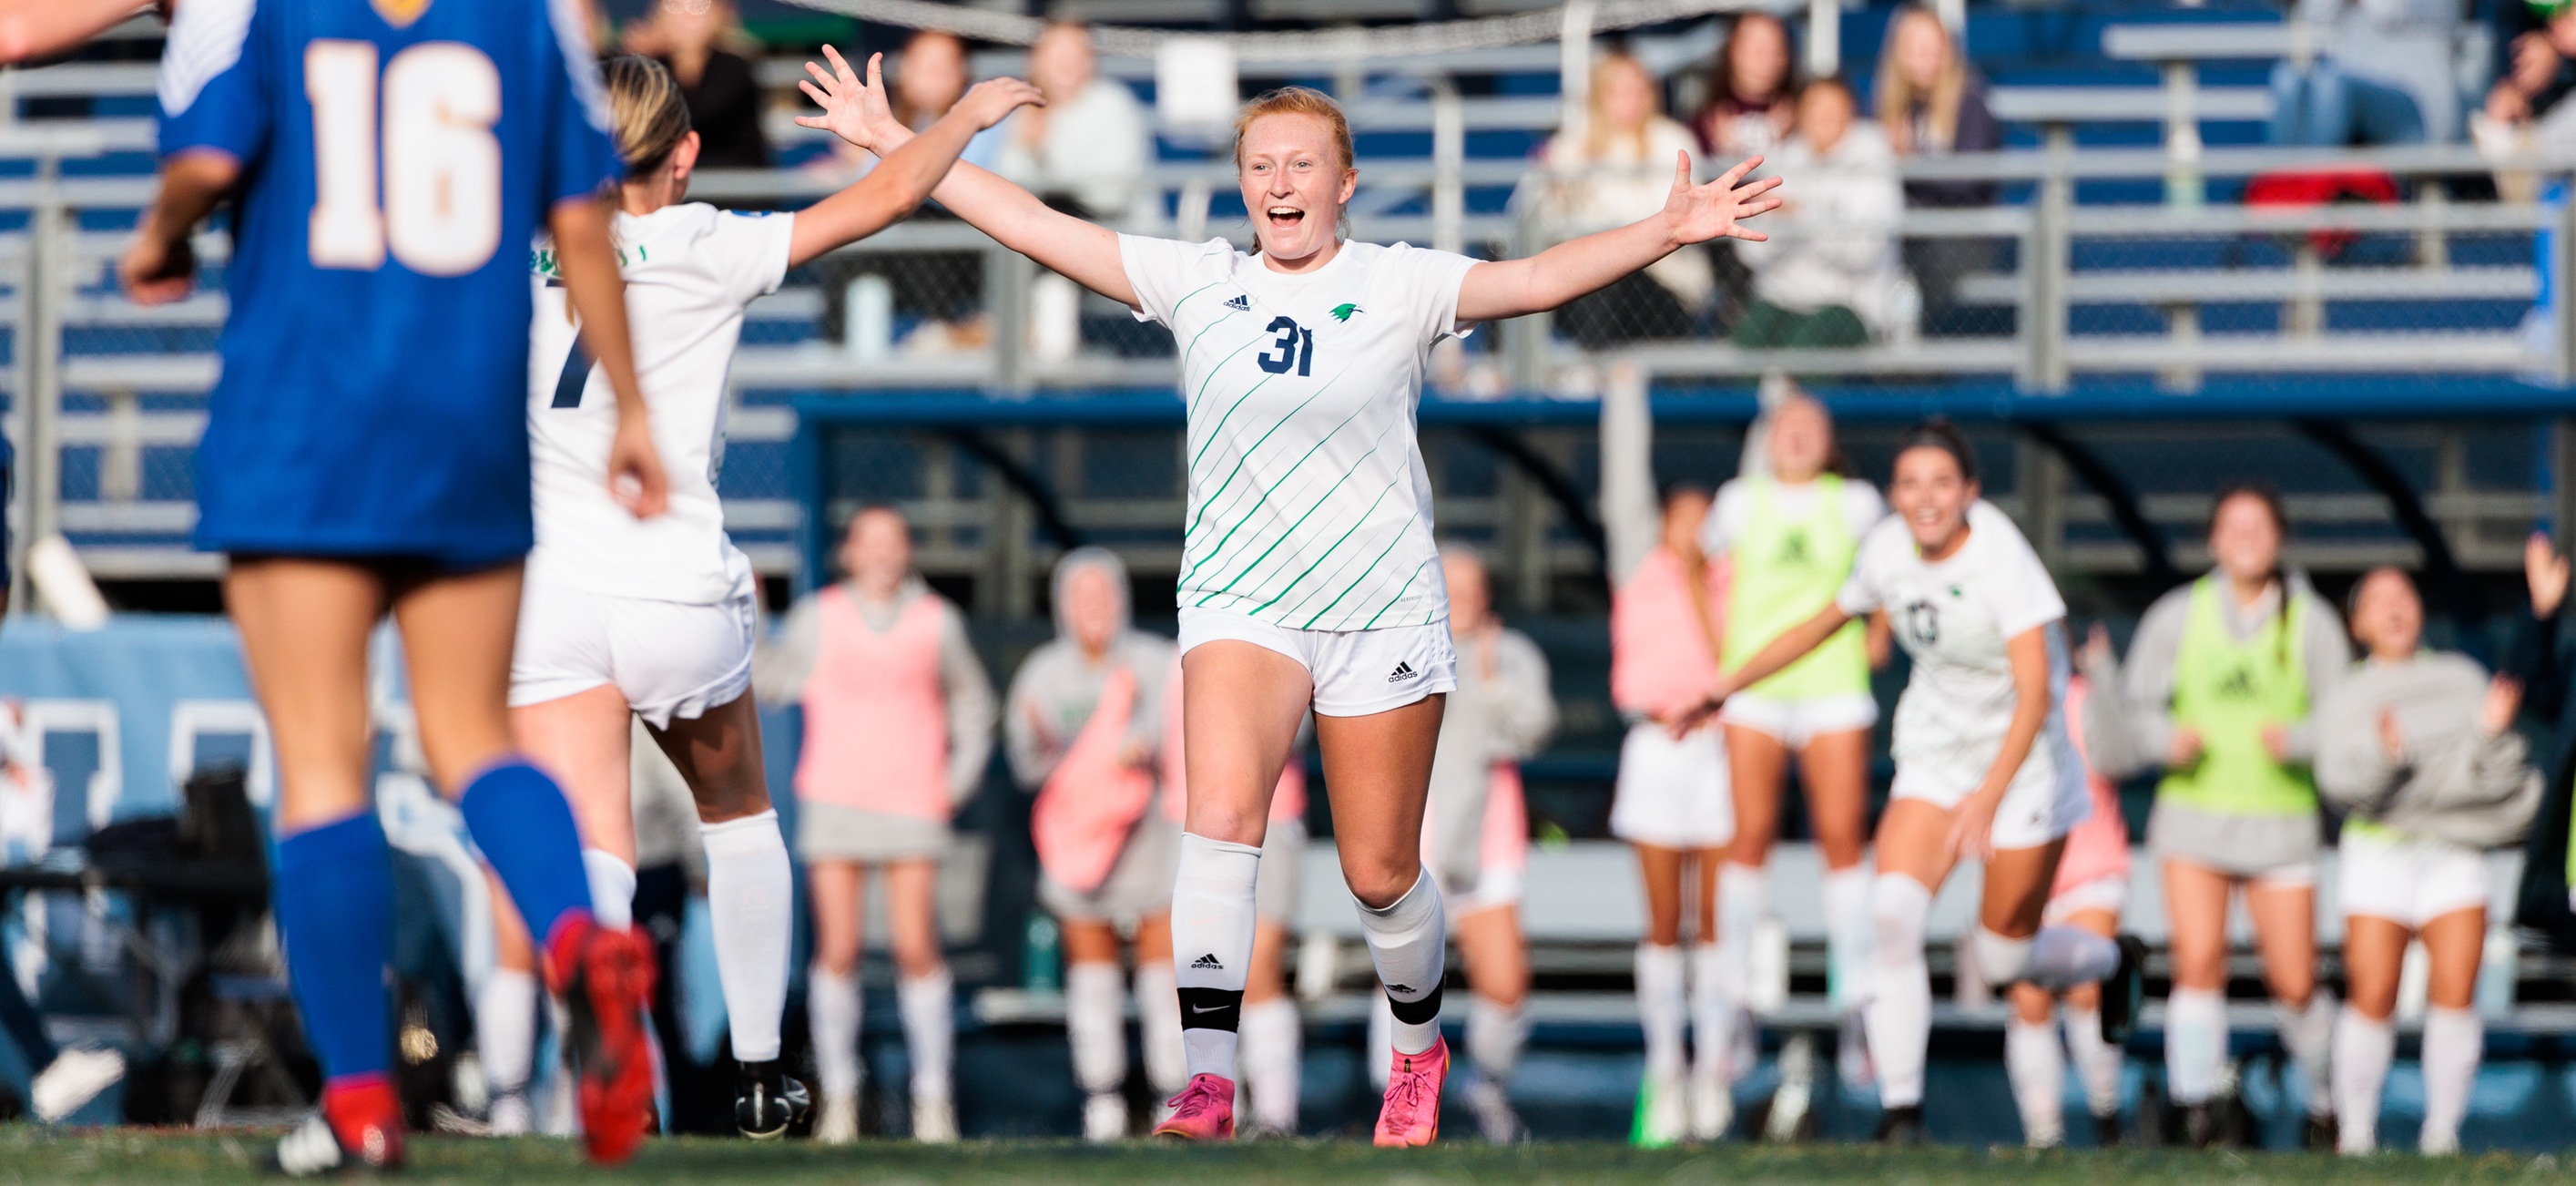 Endicott Kicks Off Homecoming Weekend with 2-1 Victory Over WNE